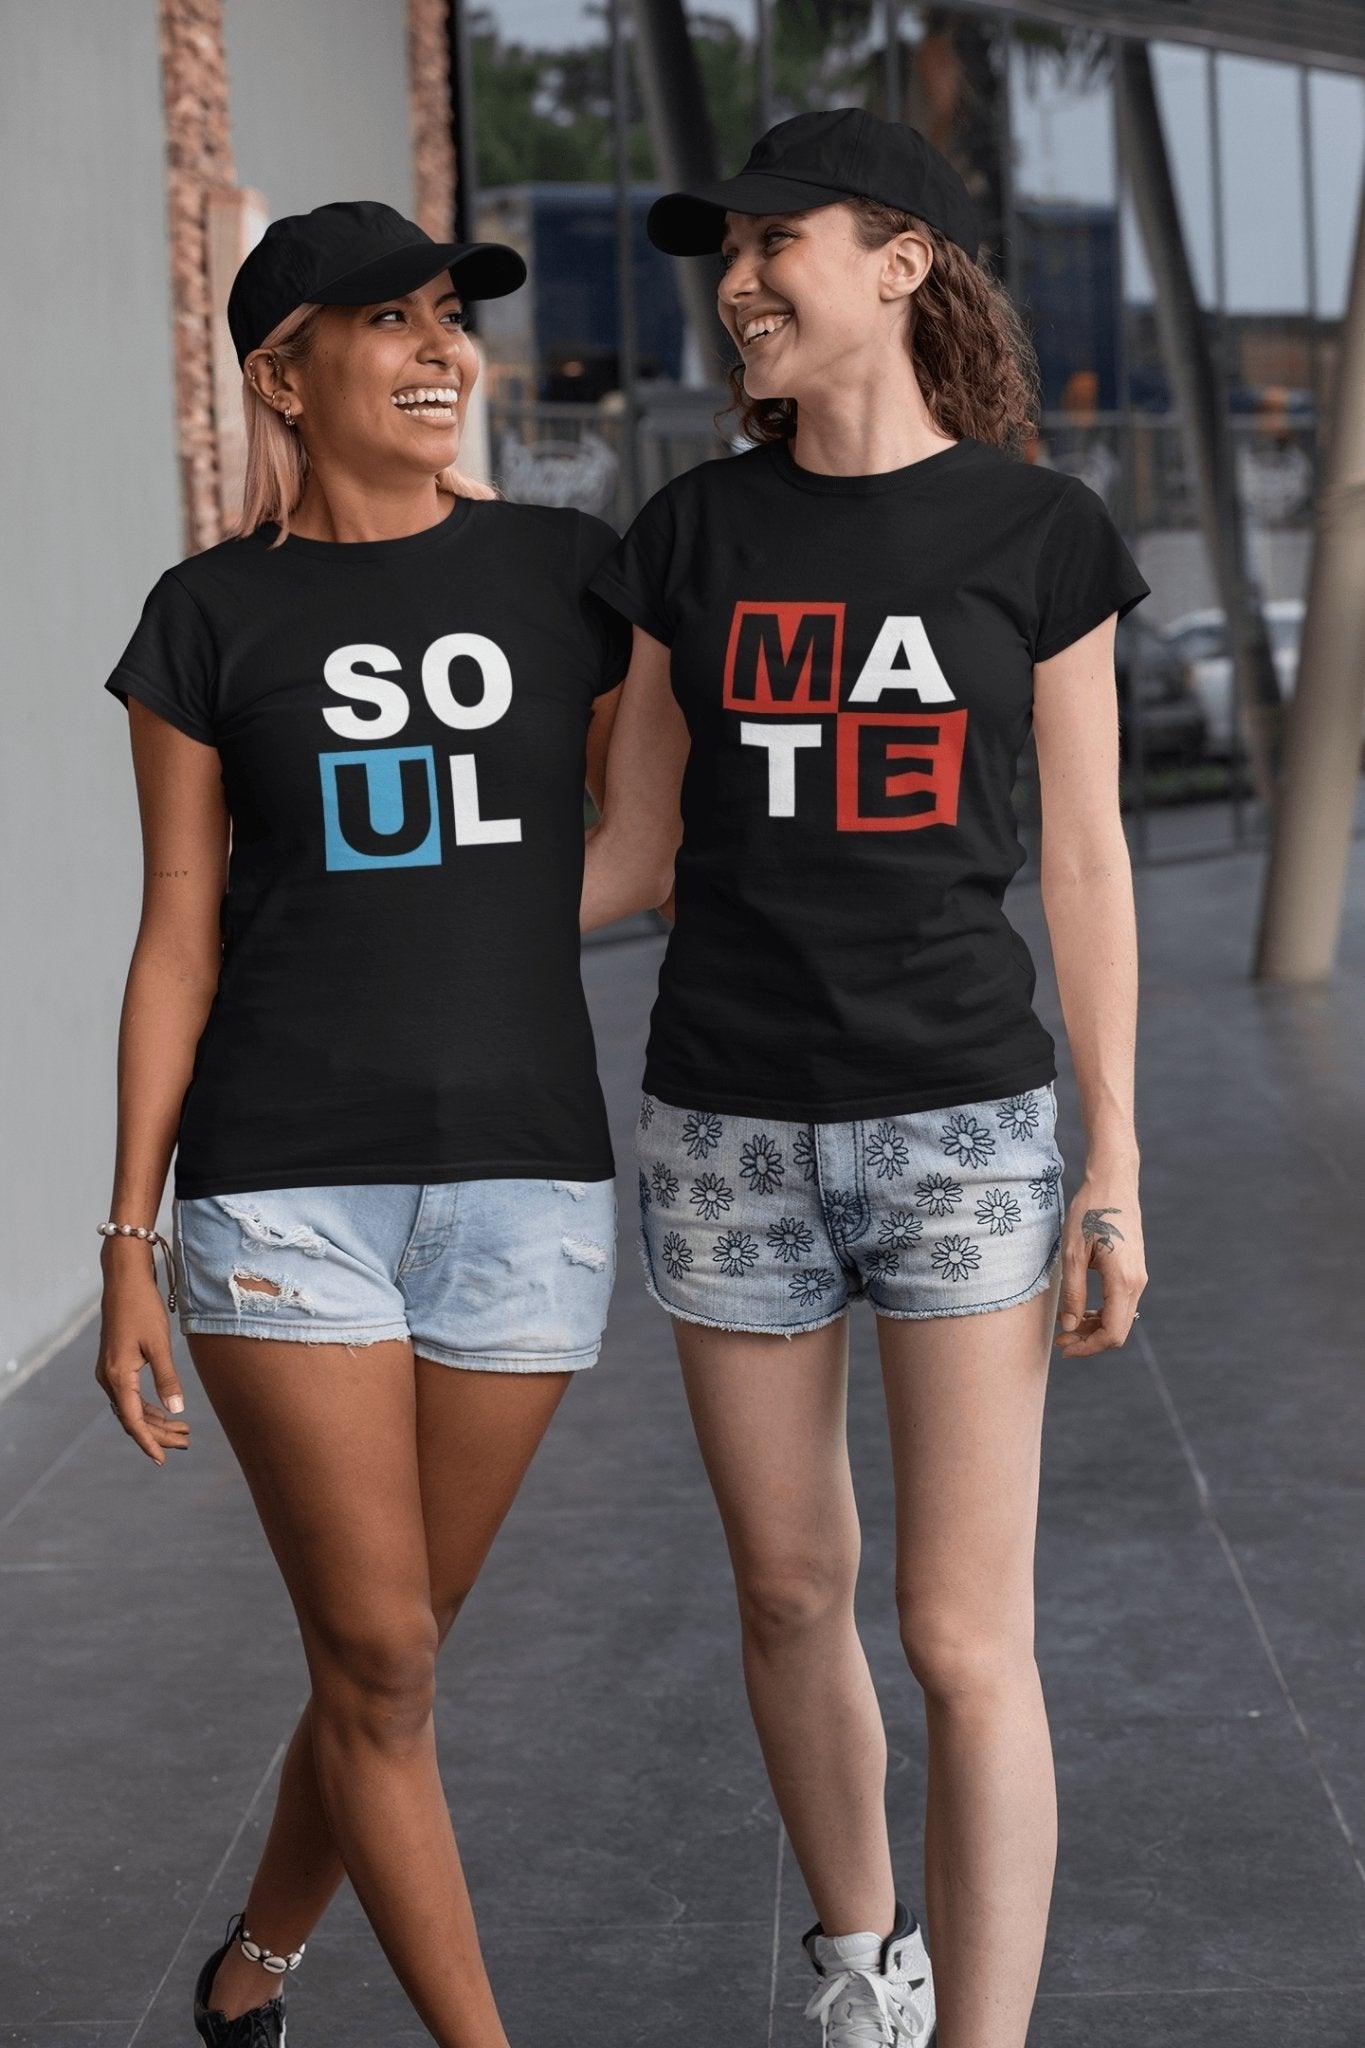 Pride T Shirts For Women In Black Colour - Soul Mate Variant